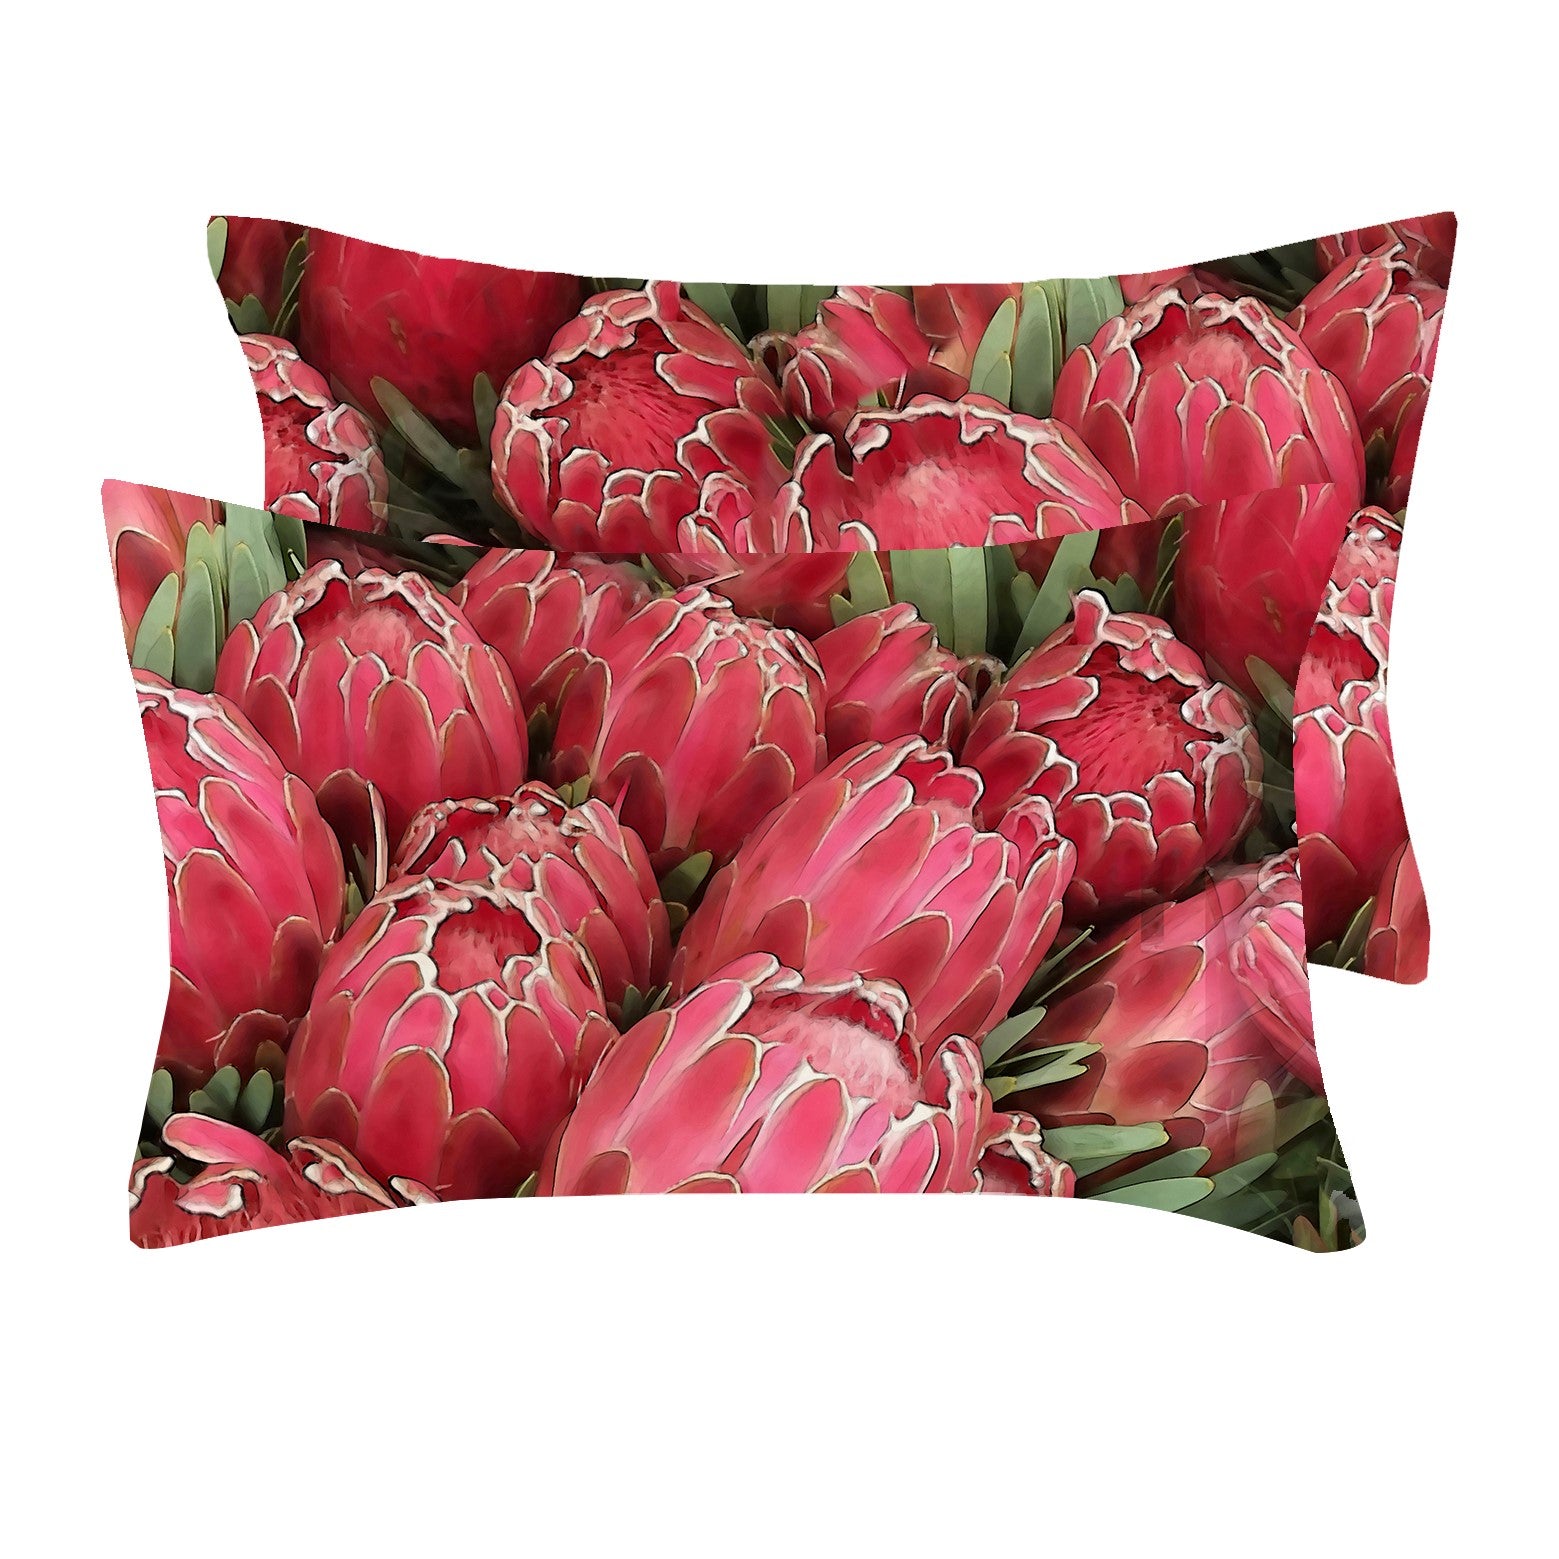 Satin Pillowcases in Protea Red